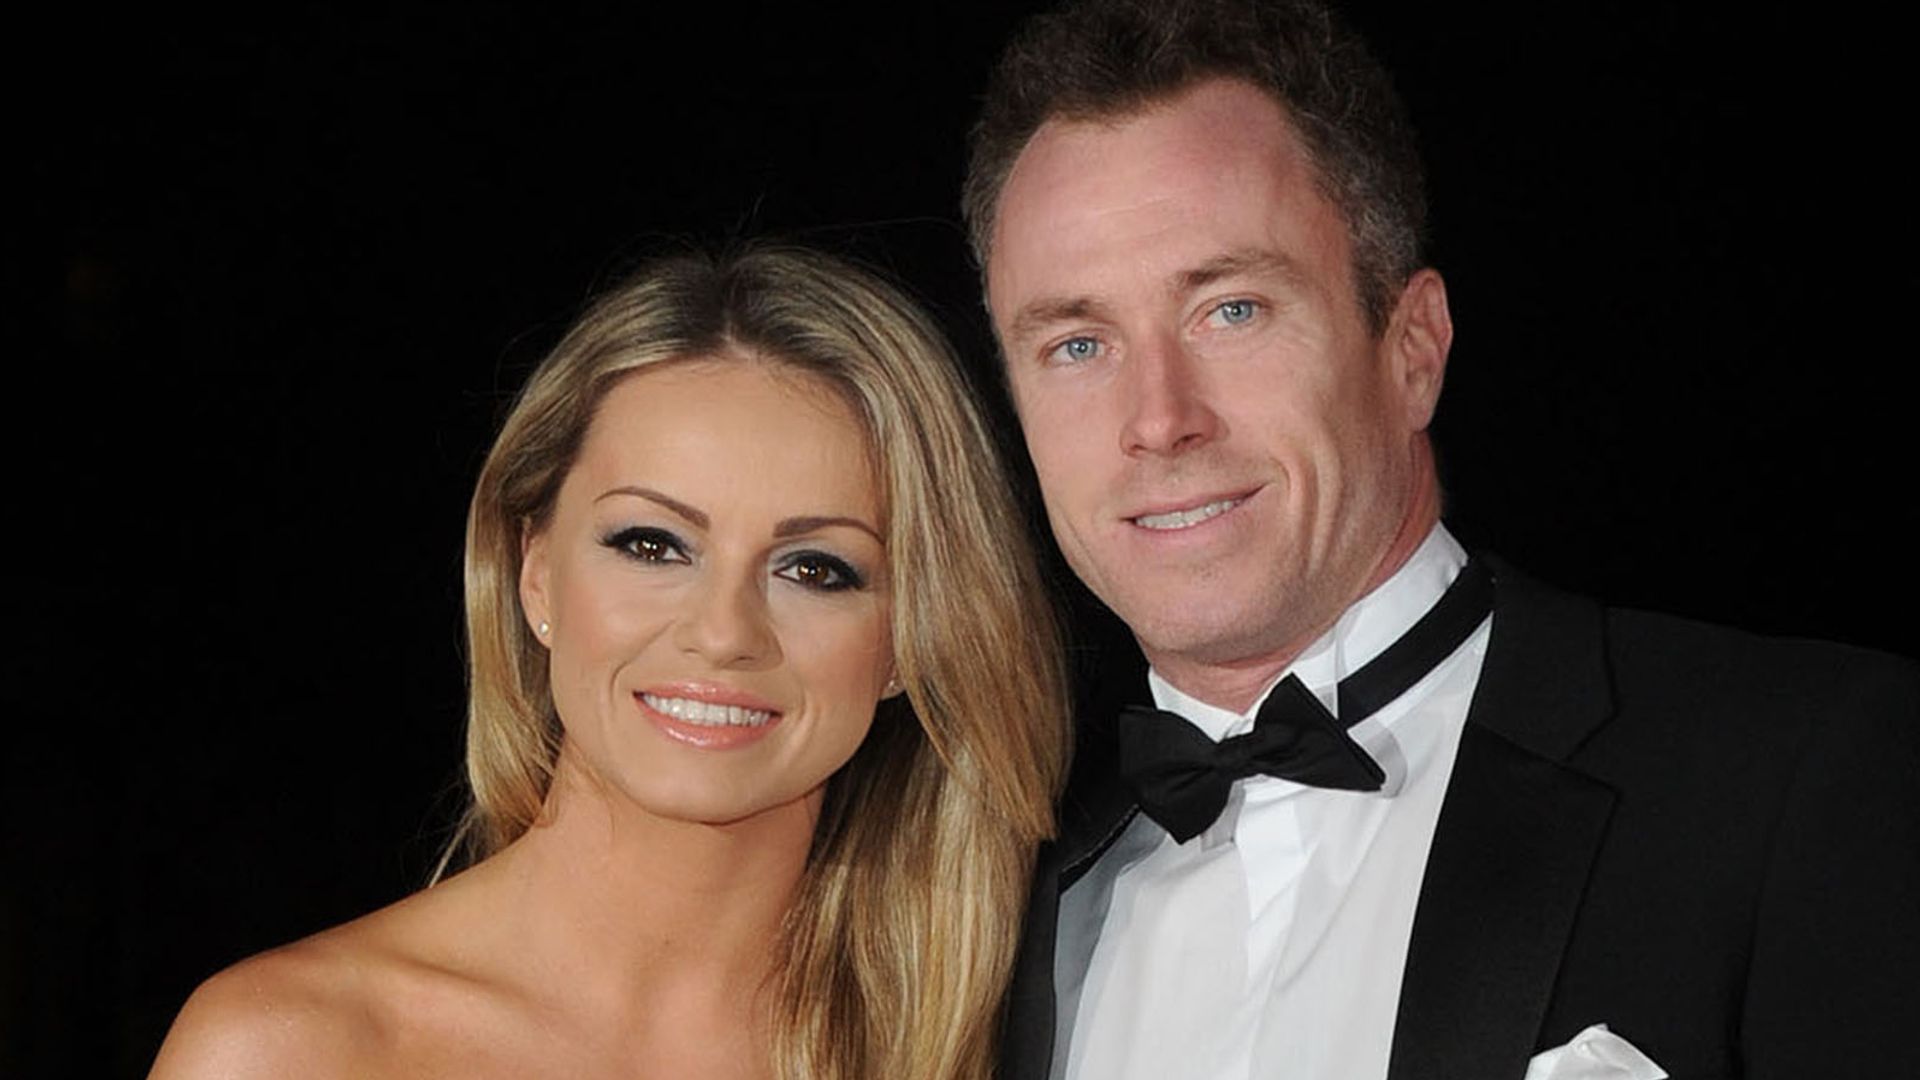 James Jordan in a black suit and Ola Jordan in a sparkly strapless dress